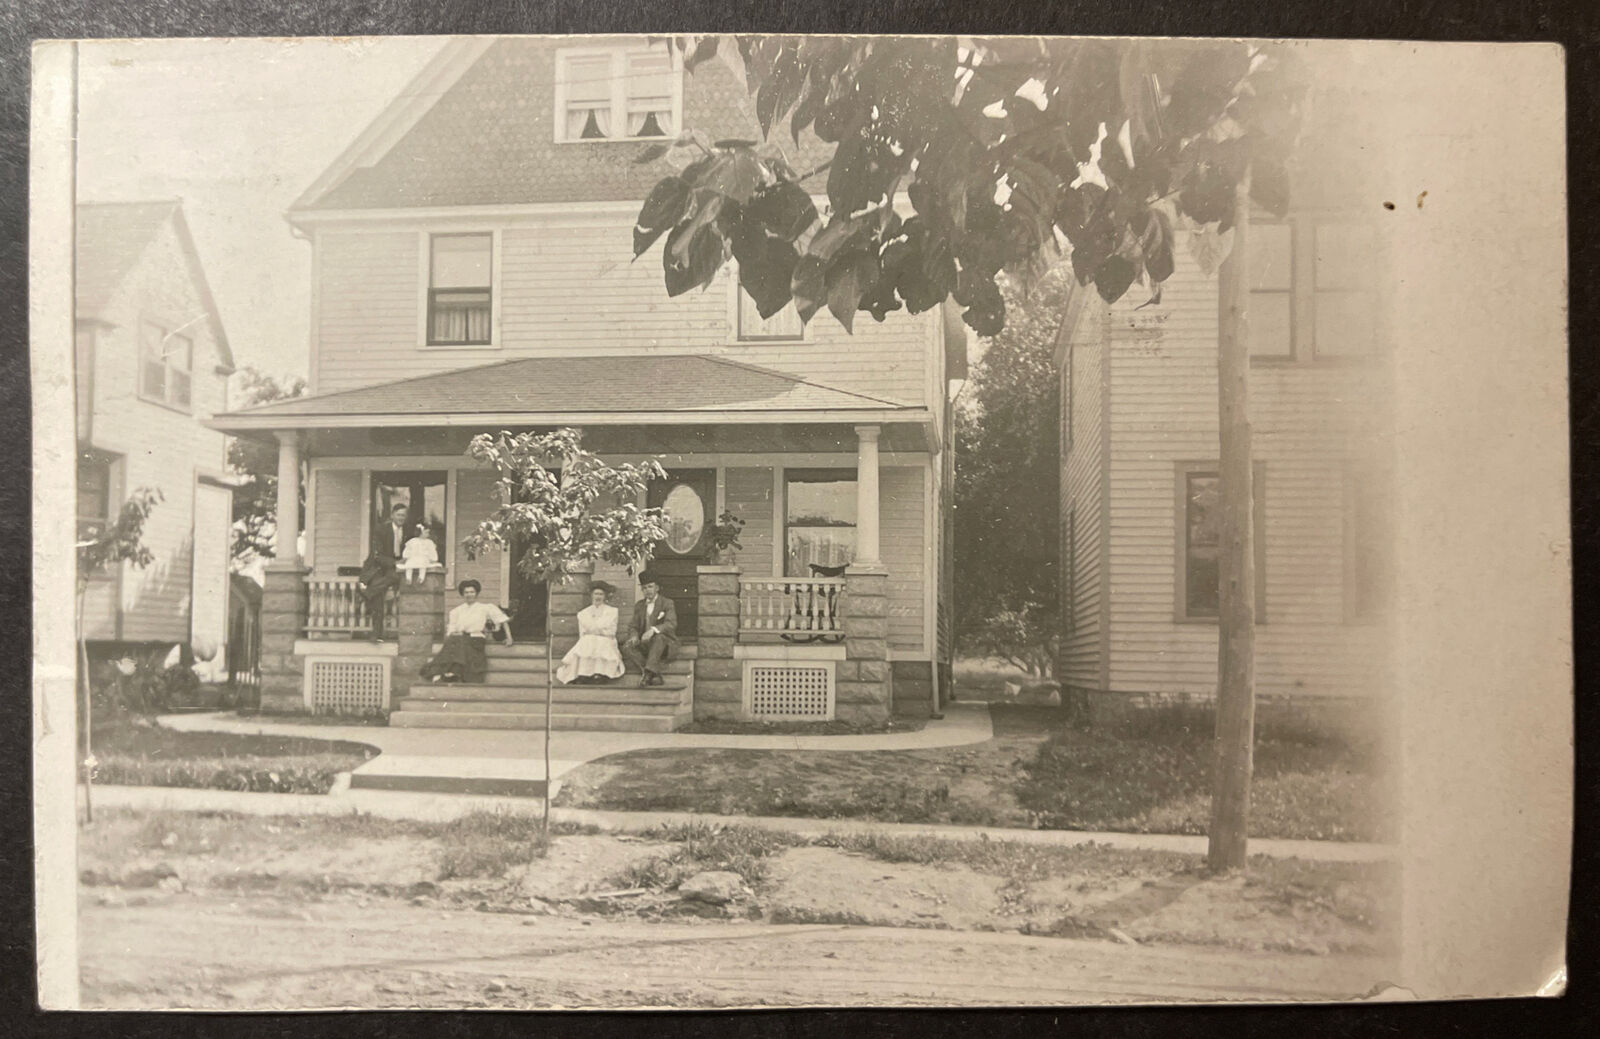 Residence Duplex with families Cleveland Ohio RPPC 1908